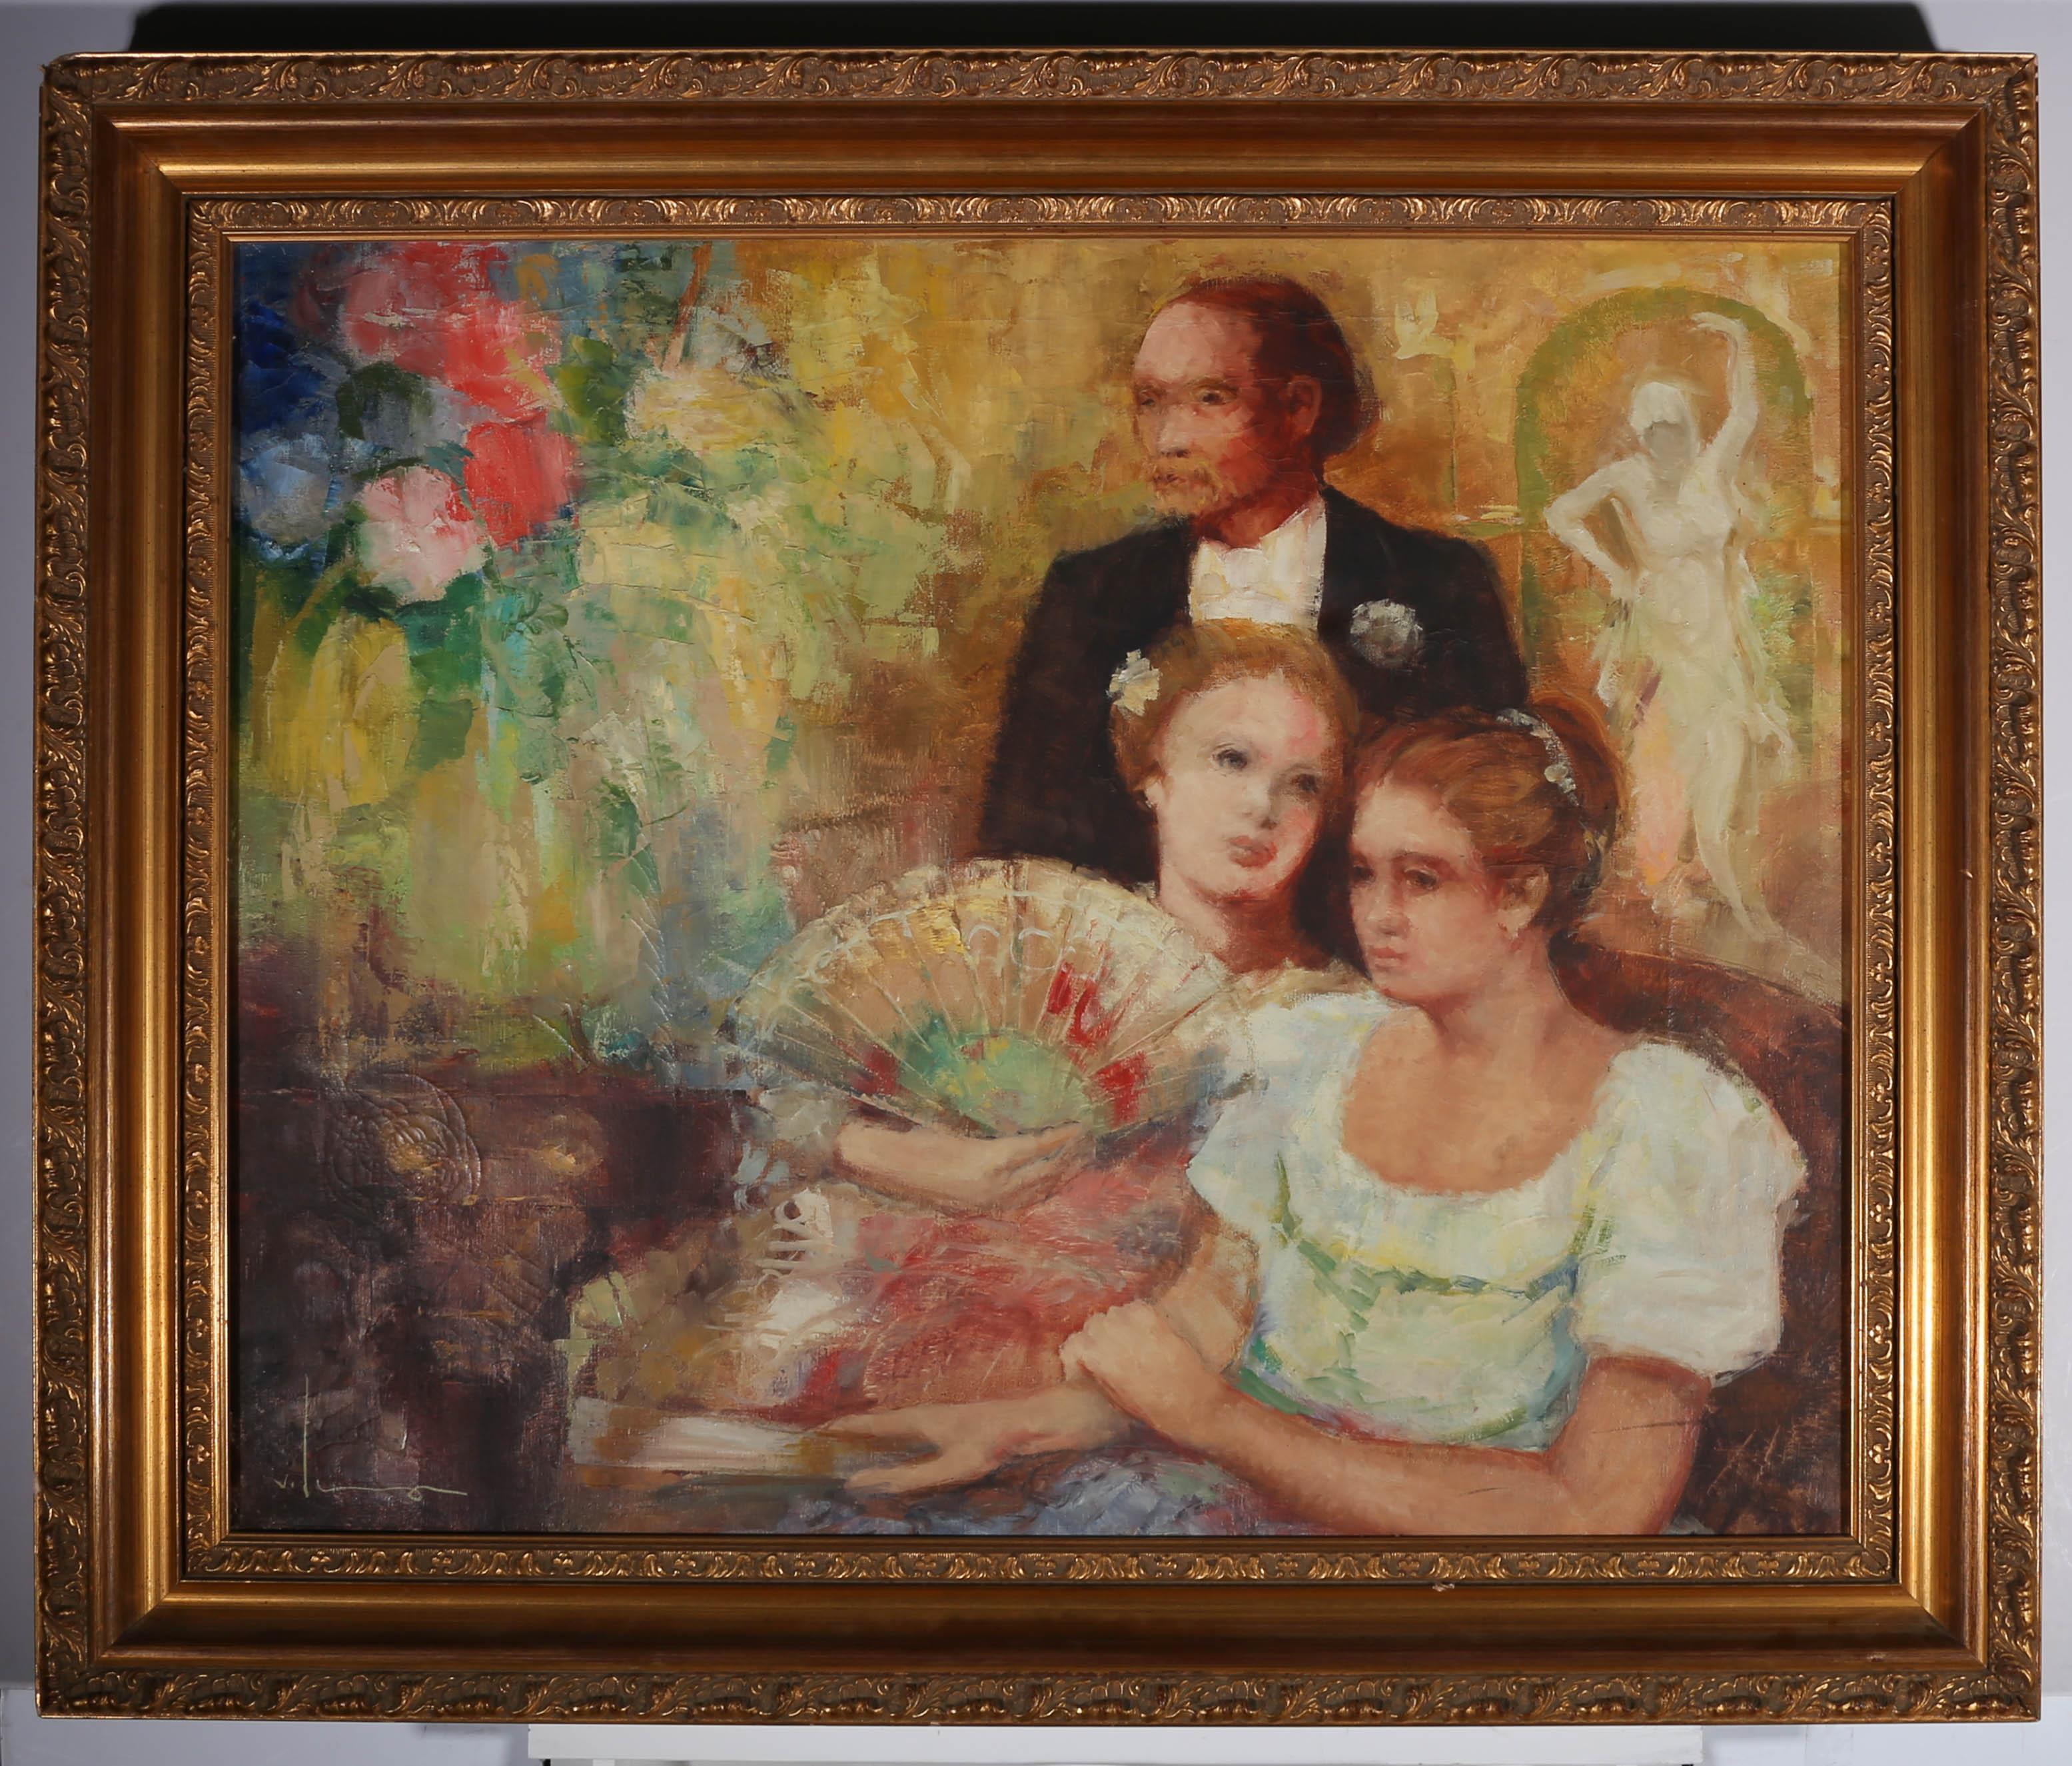 A vibrant and characterful impressionist scene in oil, showing two pretty young girls in party dresses, one holding a fan, whispering to each other as they rest on a couch at a party with a finely dressed man in white tie standing behind them. The